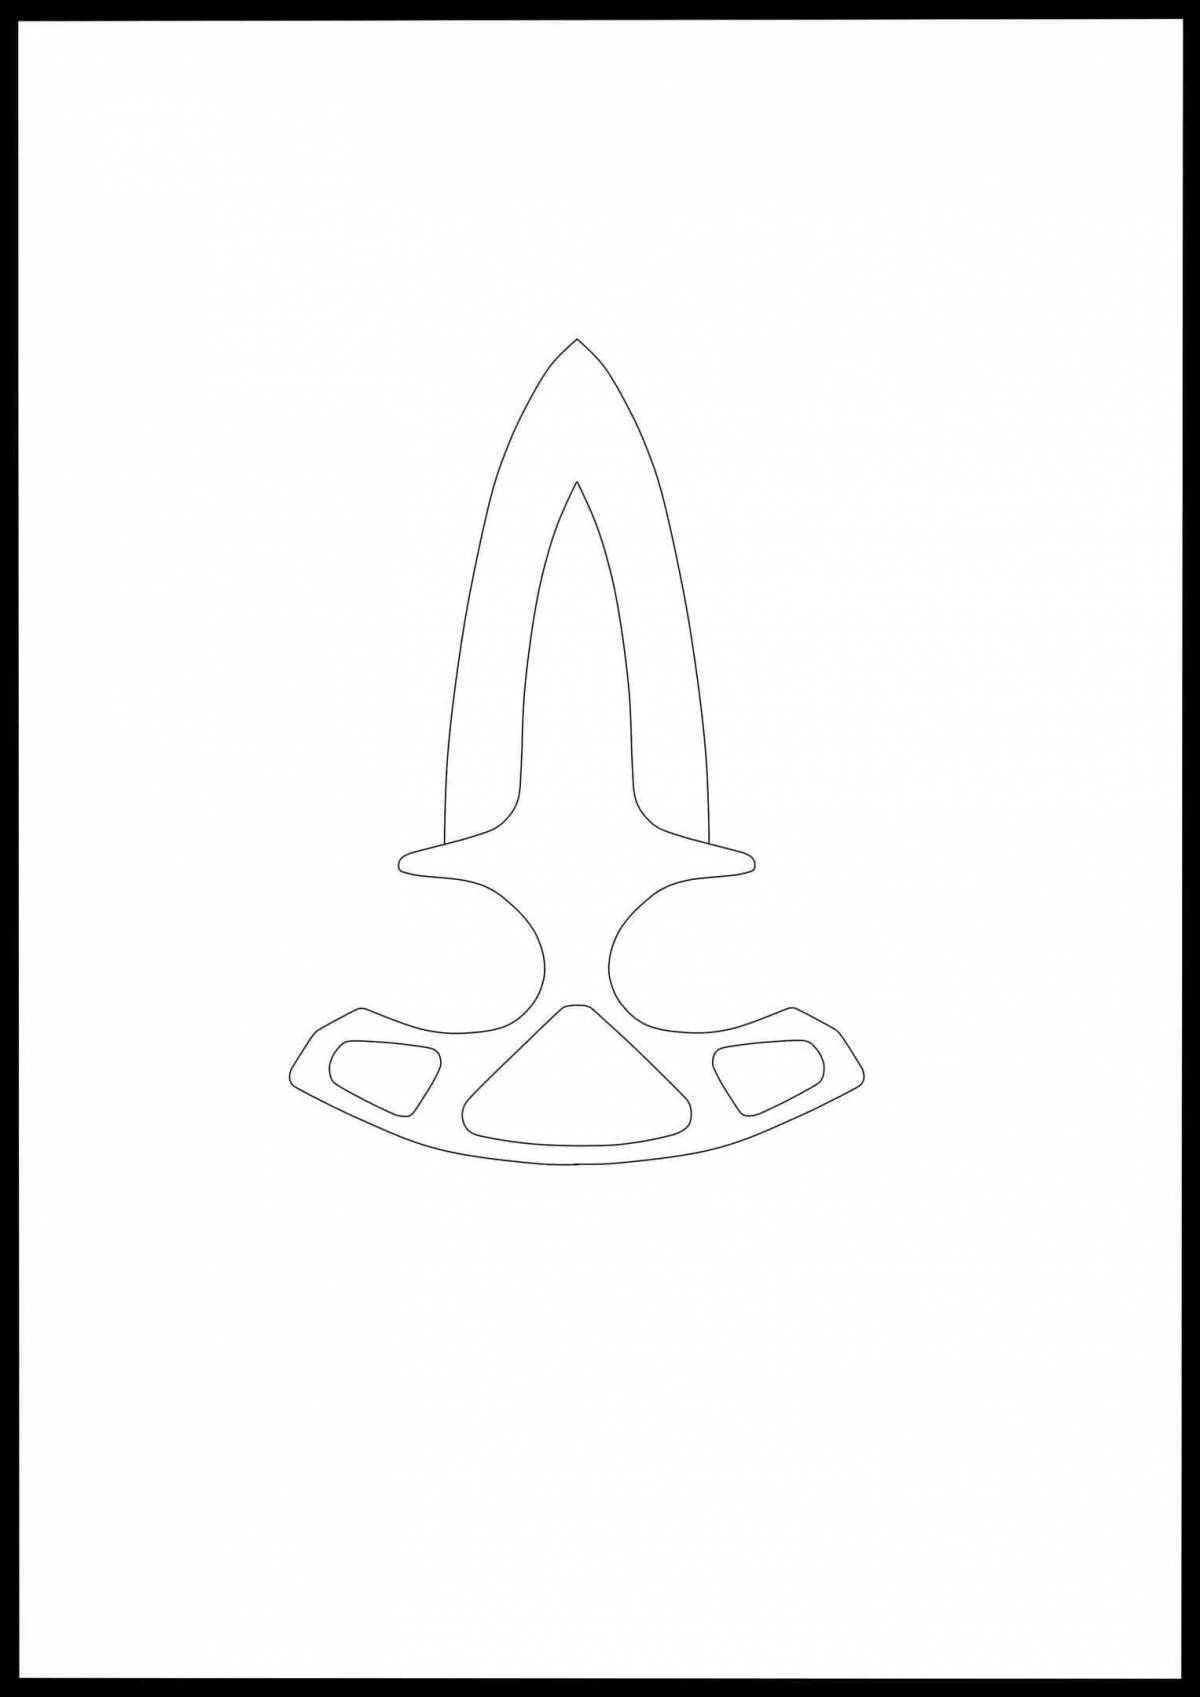 Jerking Knife Fun Coloring Page